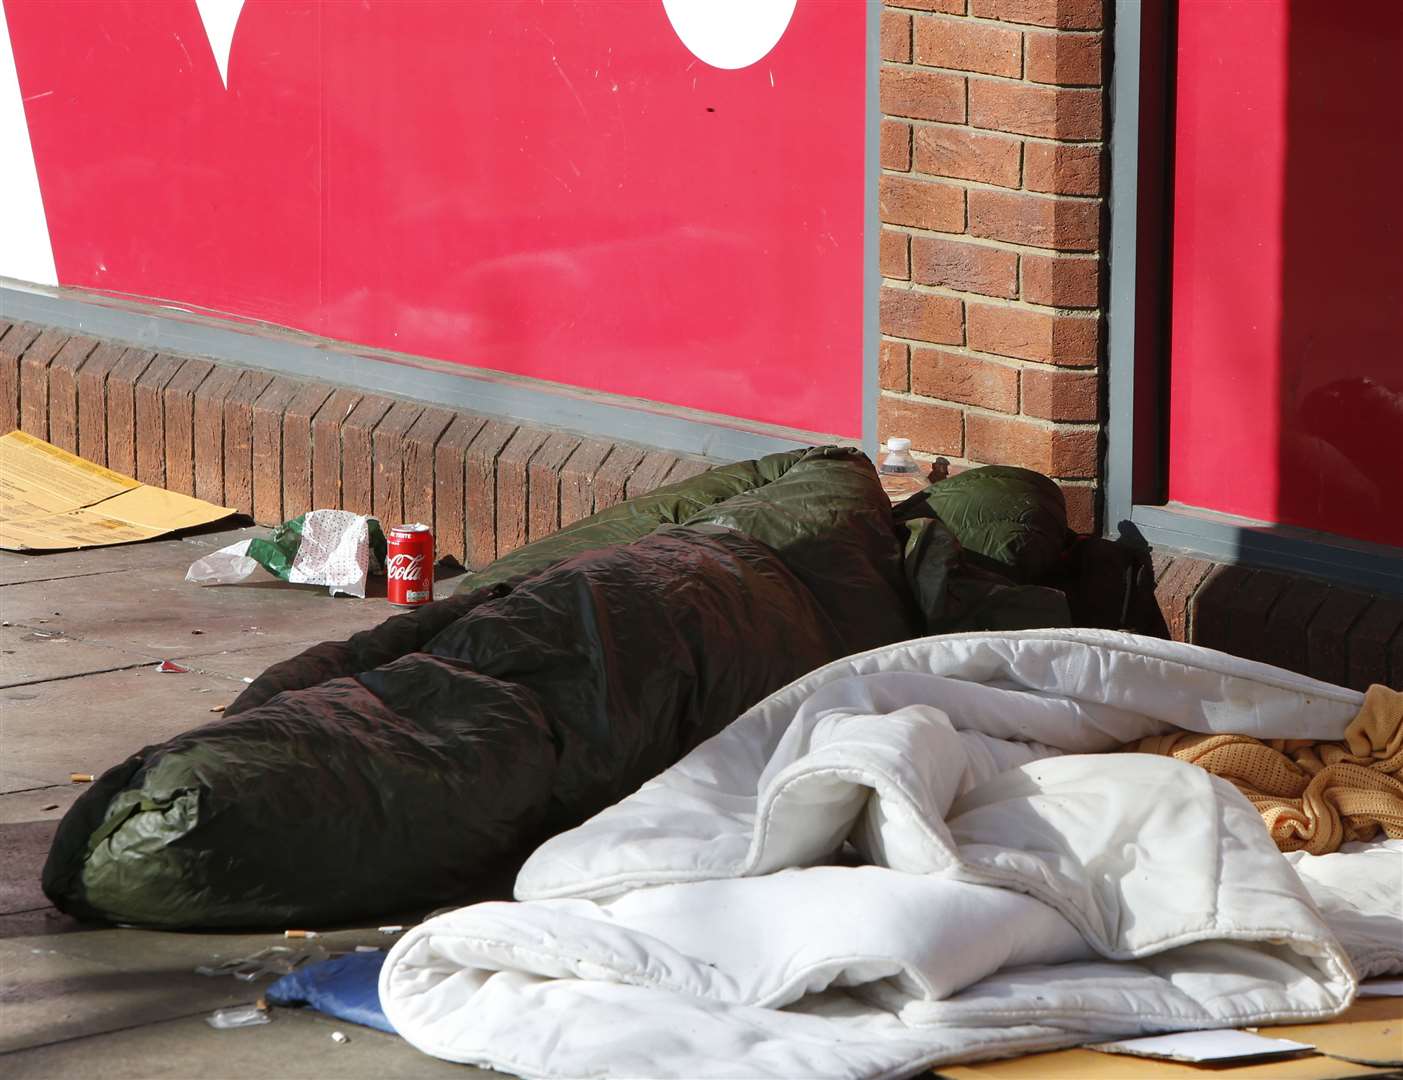 According to Catching Lives, around 25 rough sleepers are still in the temporary accommodation. Stock picture